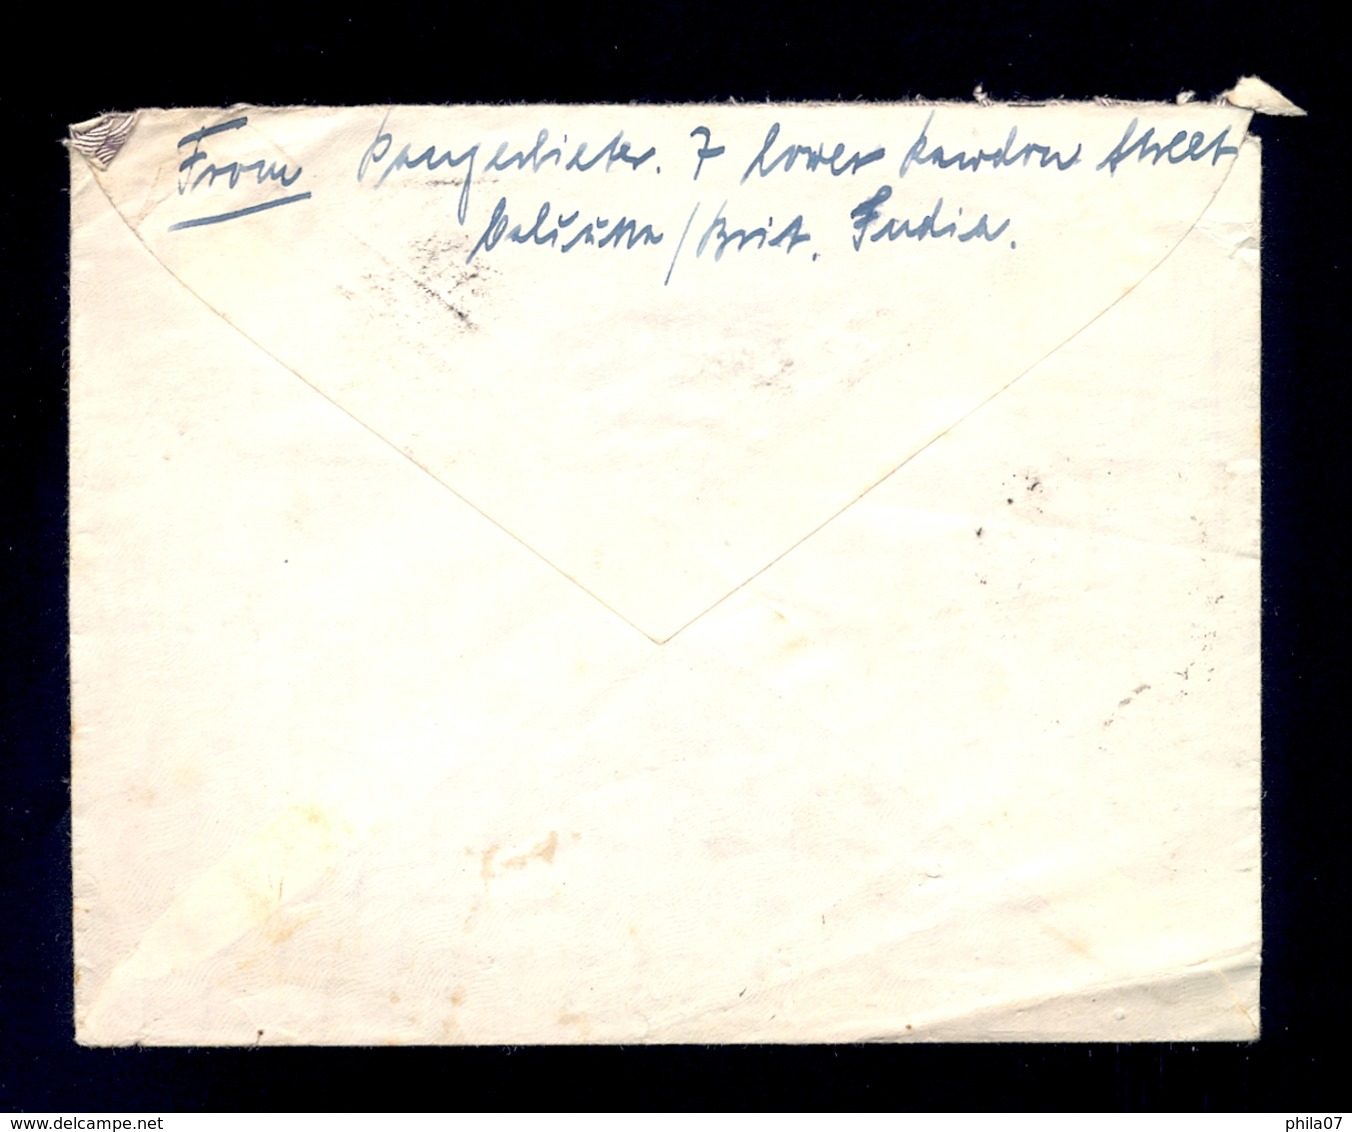 INDIA - Airmail Cover Sent By Airmail From Calcutta To Germany 193?. Nice Three Colored Franking. - Airmail